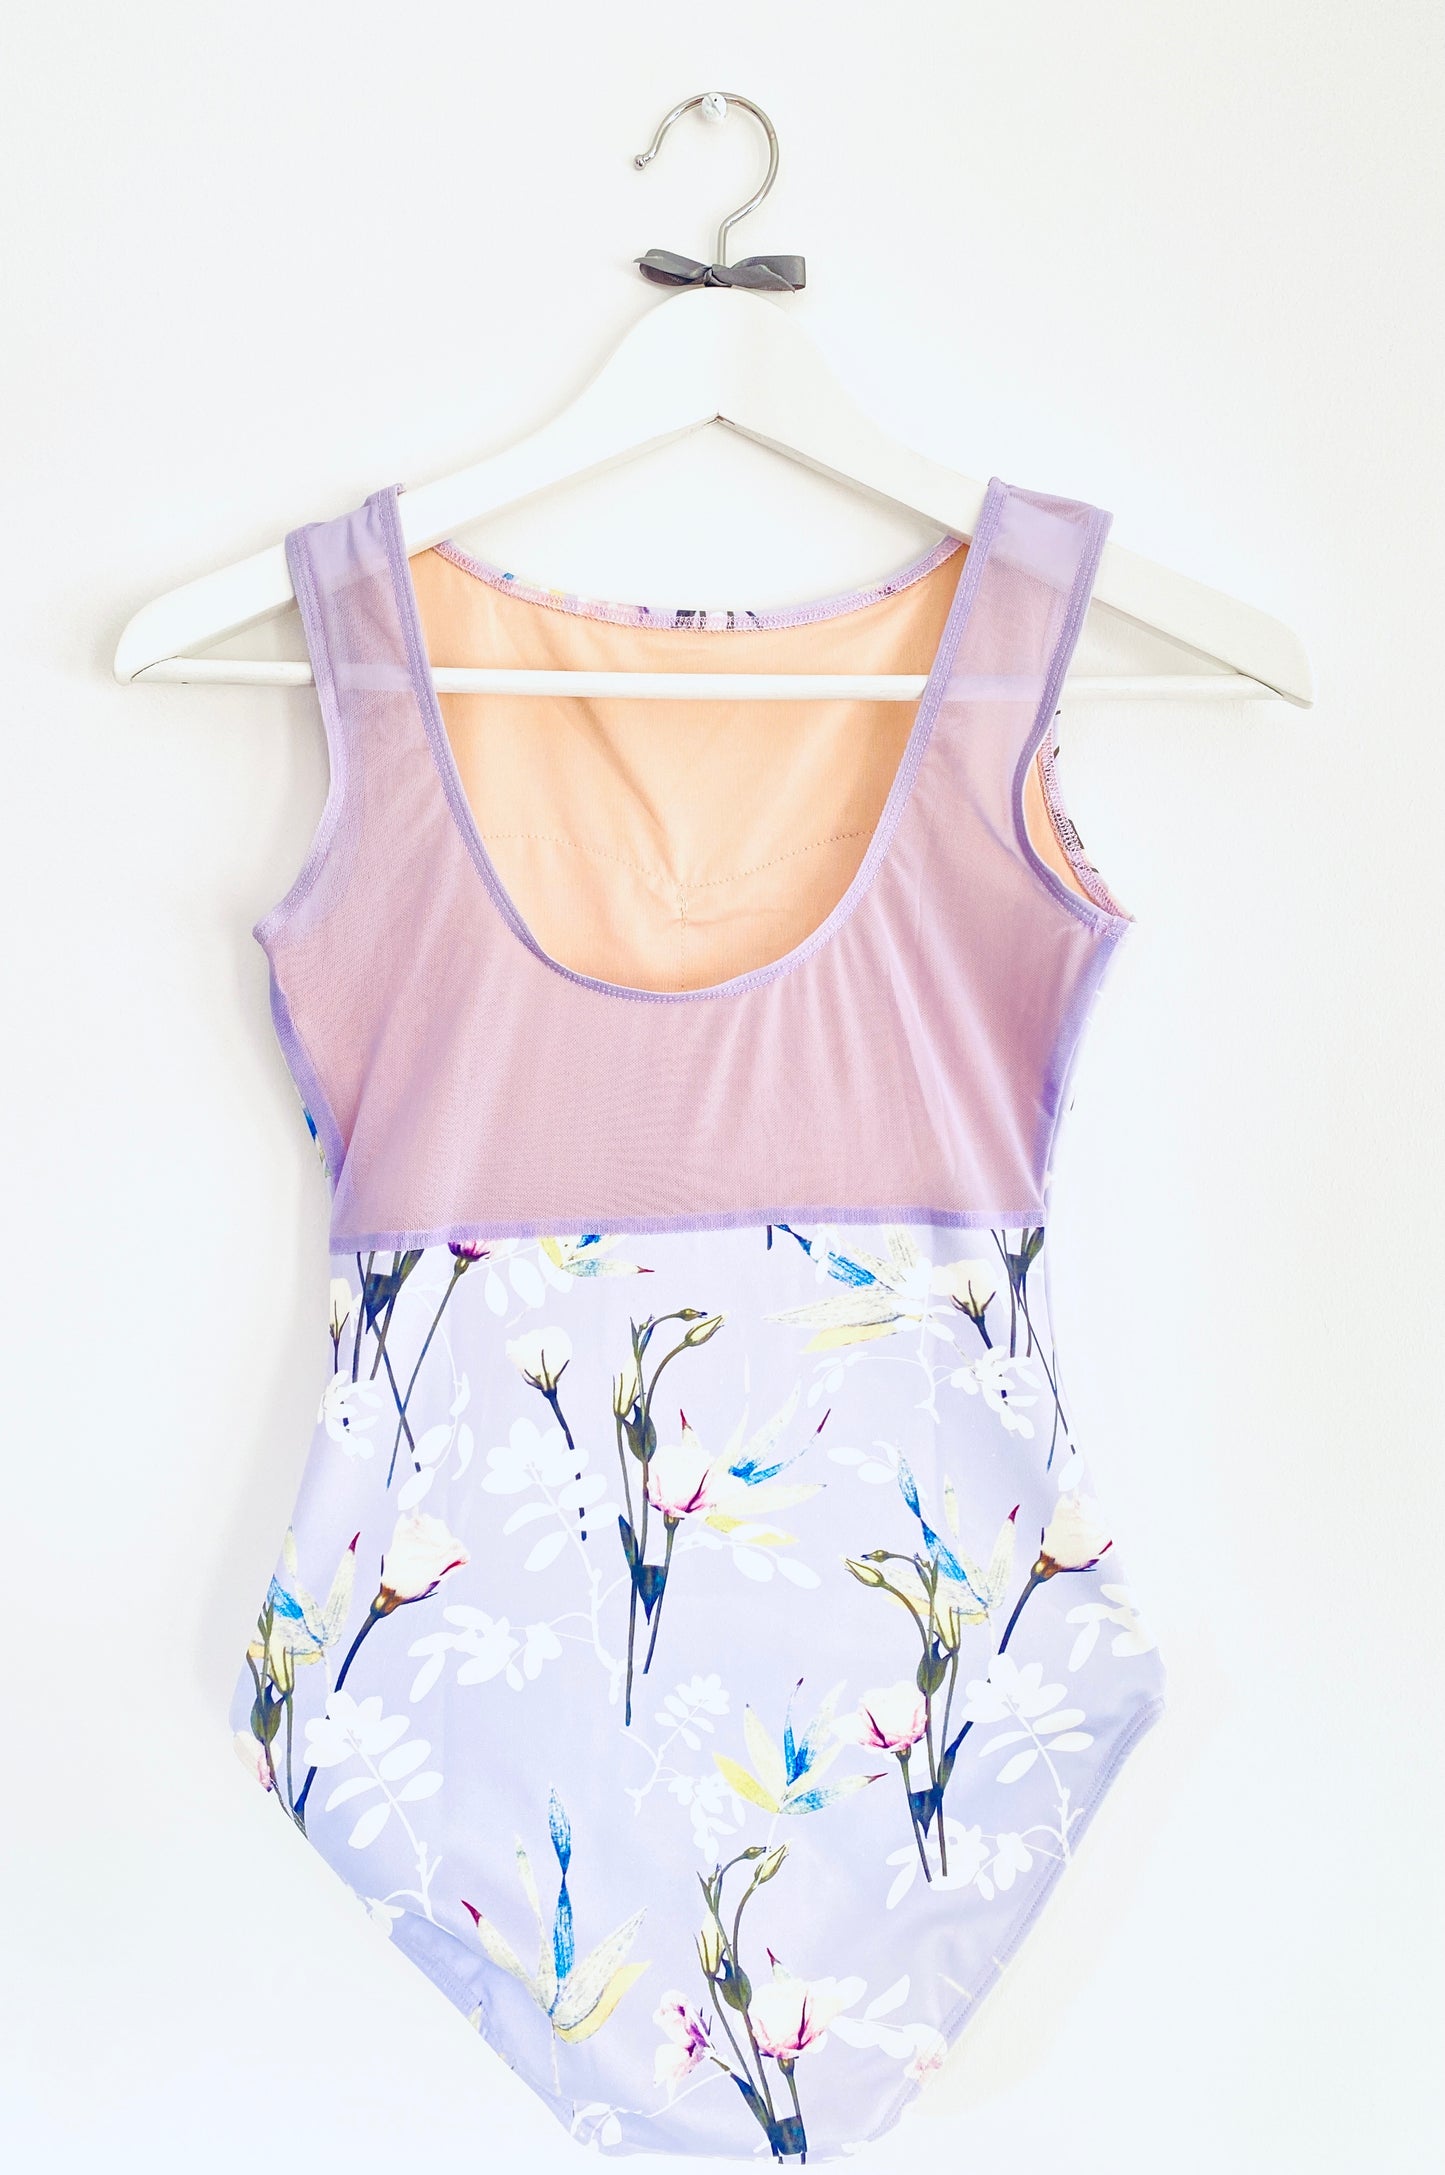 Sleeveless tank leotard with meadow flower pattern on a lilac background from The Collective Dancewear